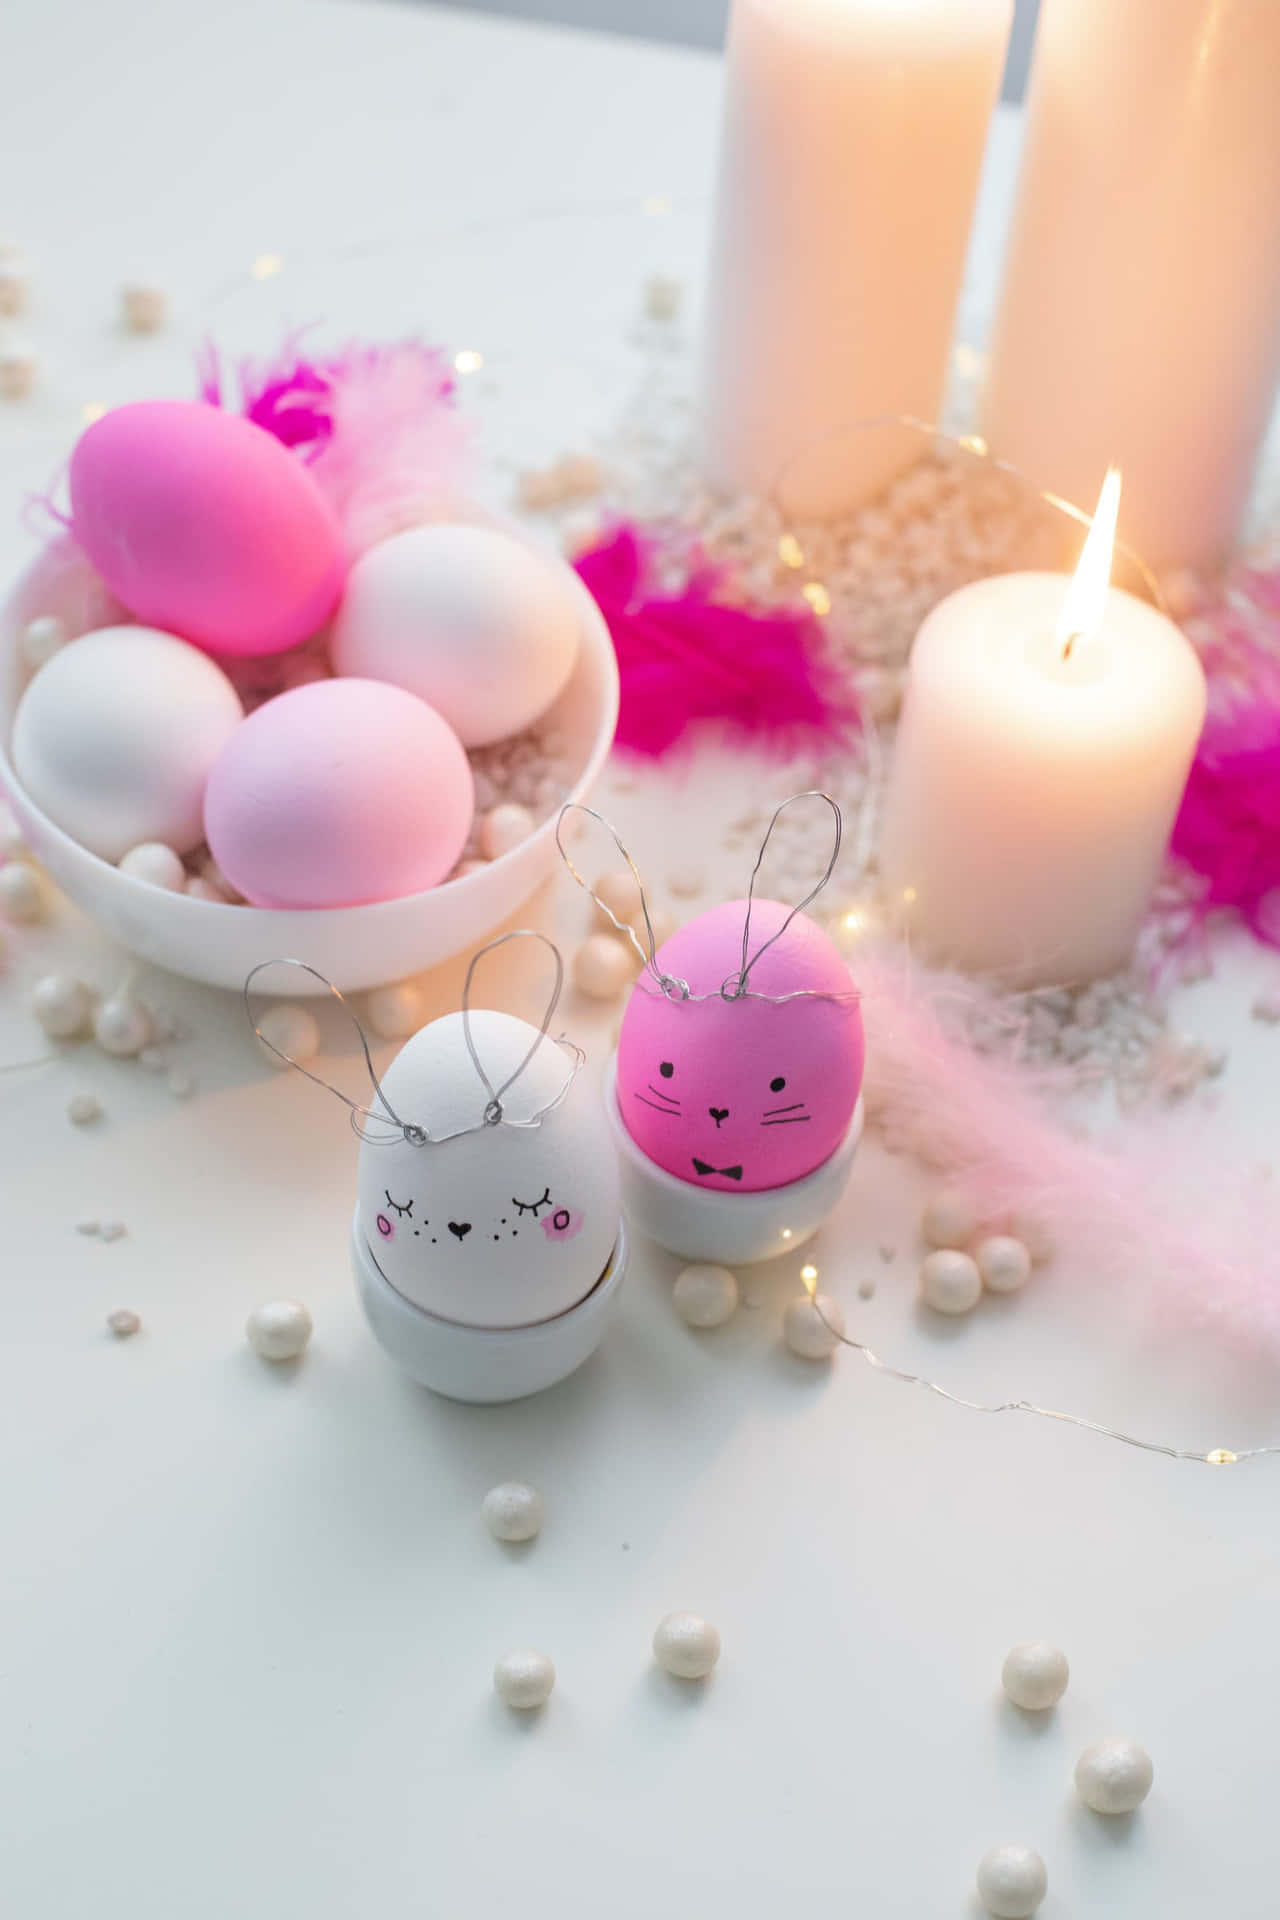 A Table With Pink And White Eggs And Candles